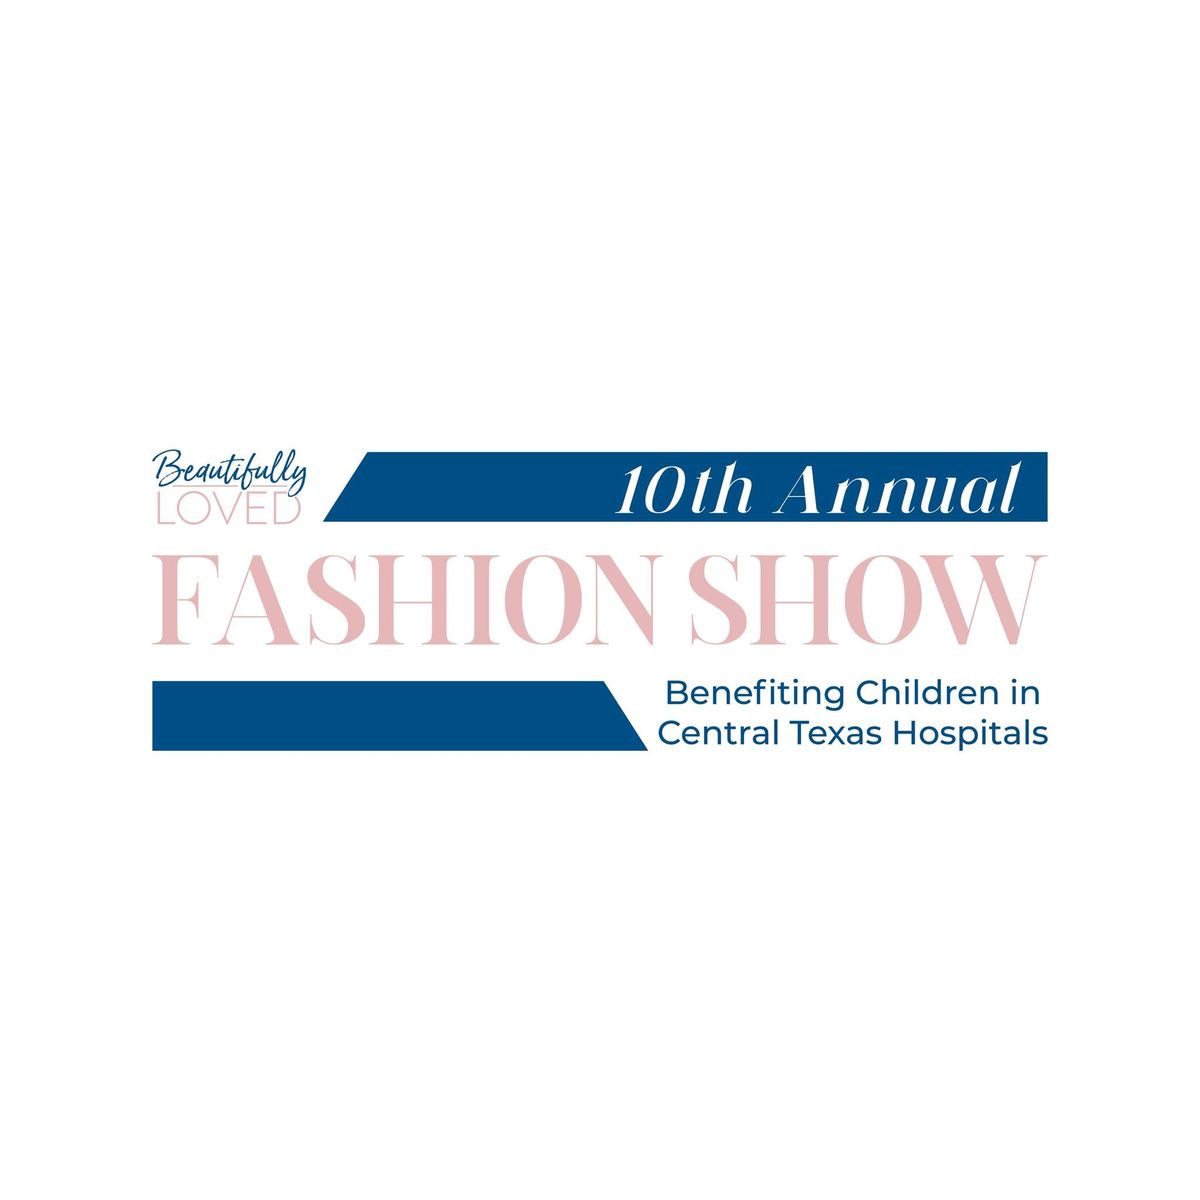 10th Annual Beautifully Loved Fashion Show